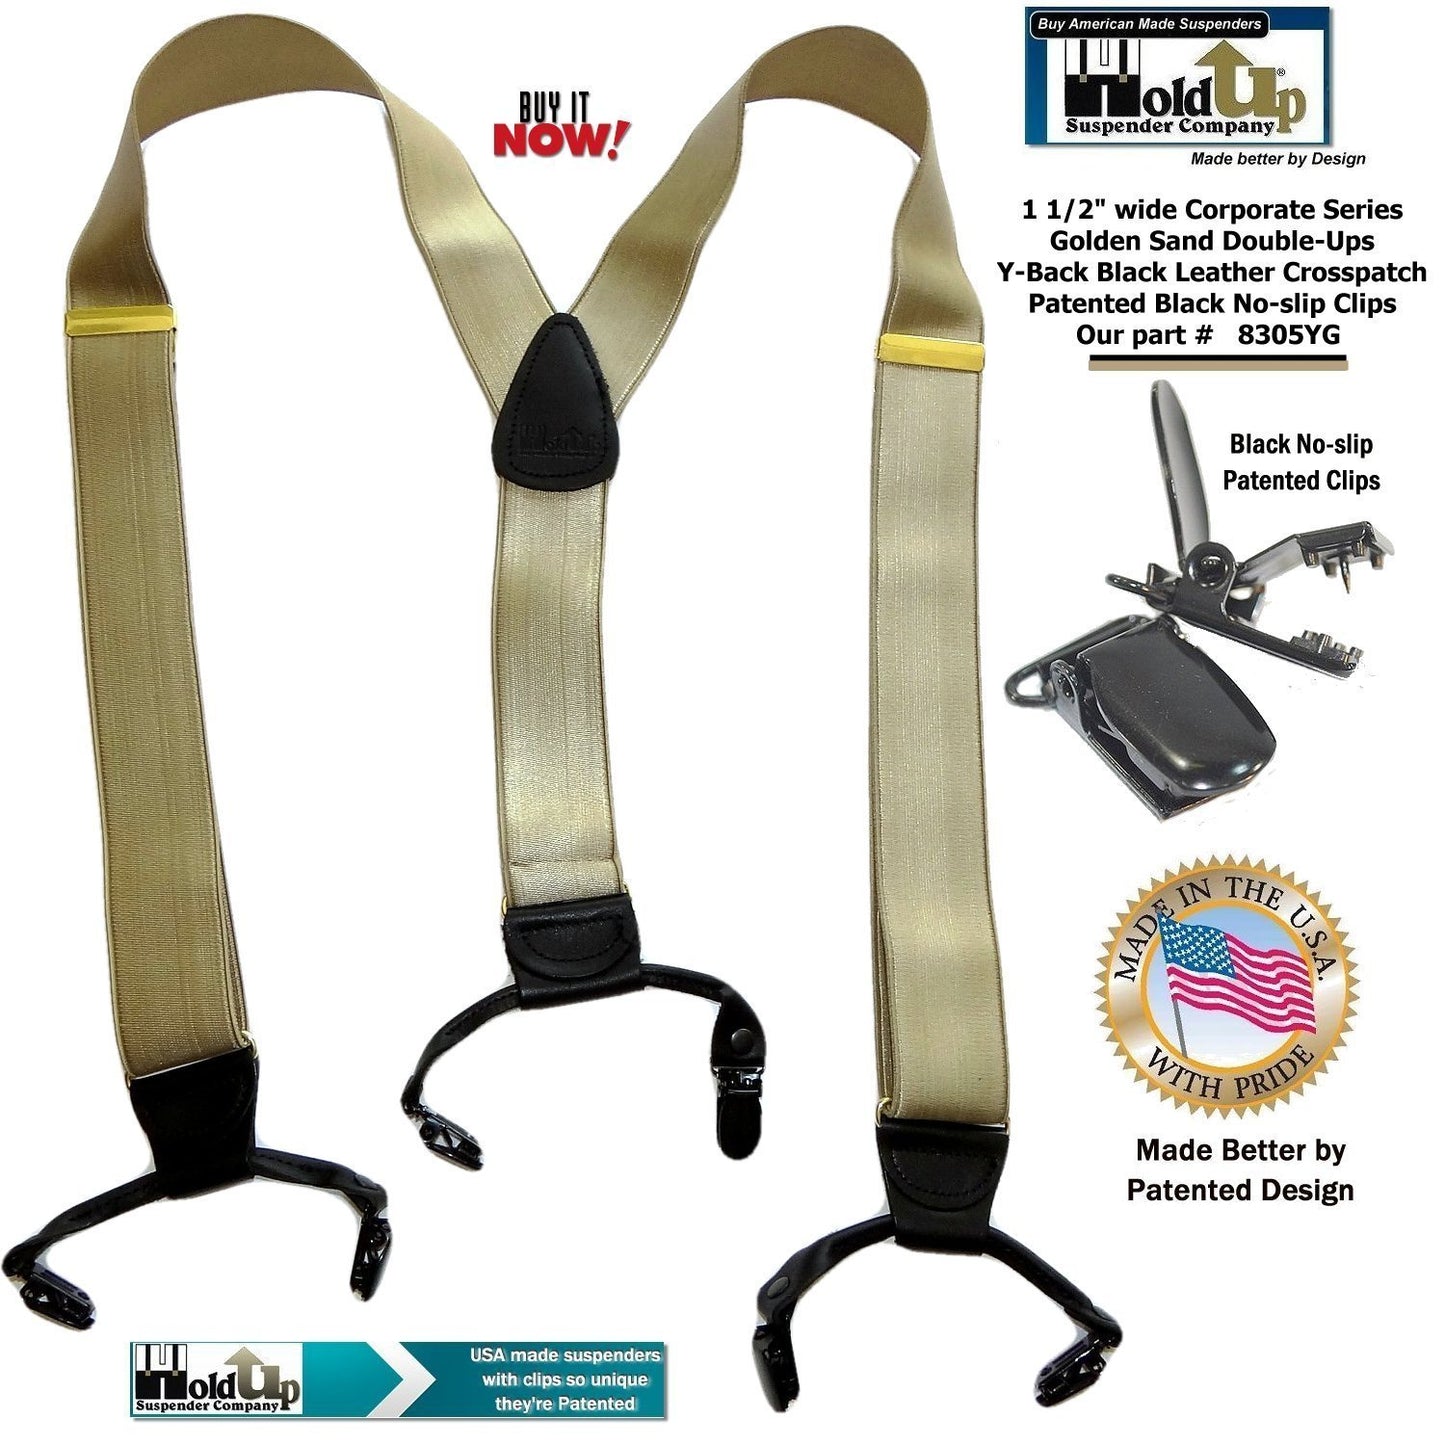 HoldUp Suspender Brand Double-up style Y-back Suspenders in Satin Finish Golden Sand Color